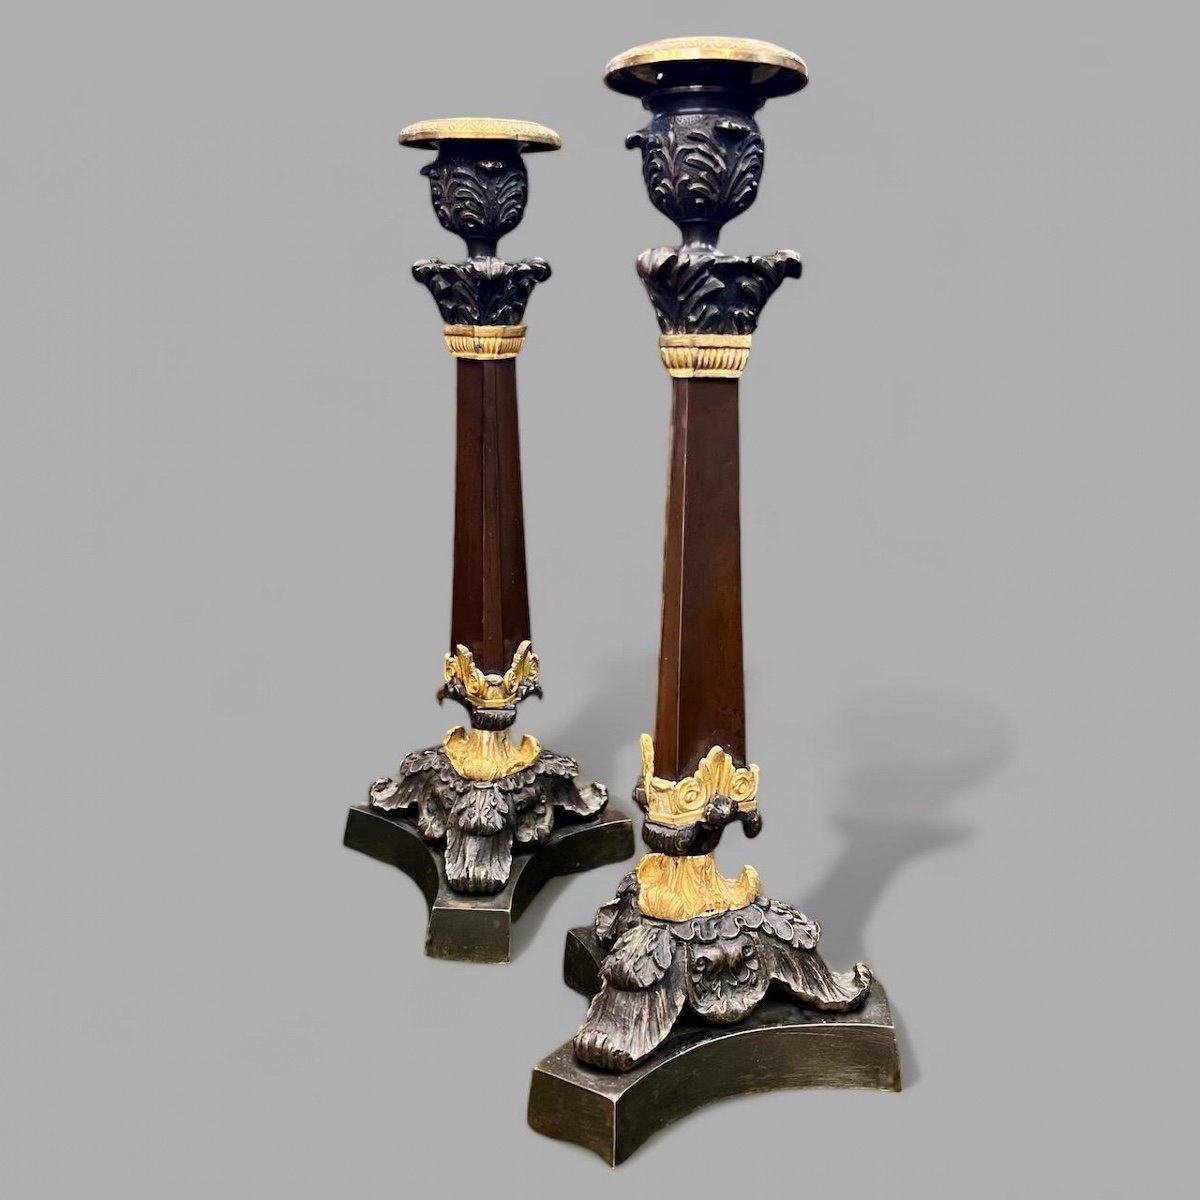 Pair Of Double Patina Bronze Candlesticks From 19th Century Restoration Period -photo-1